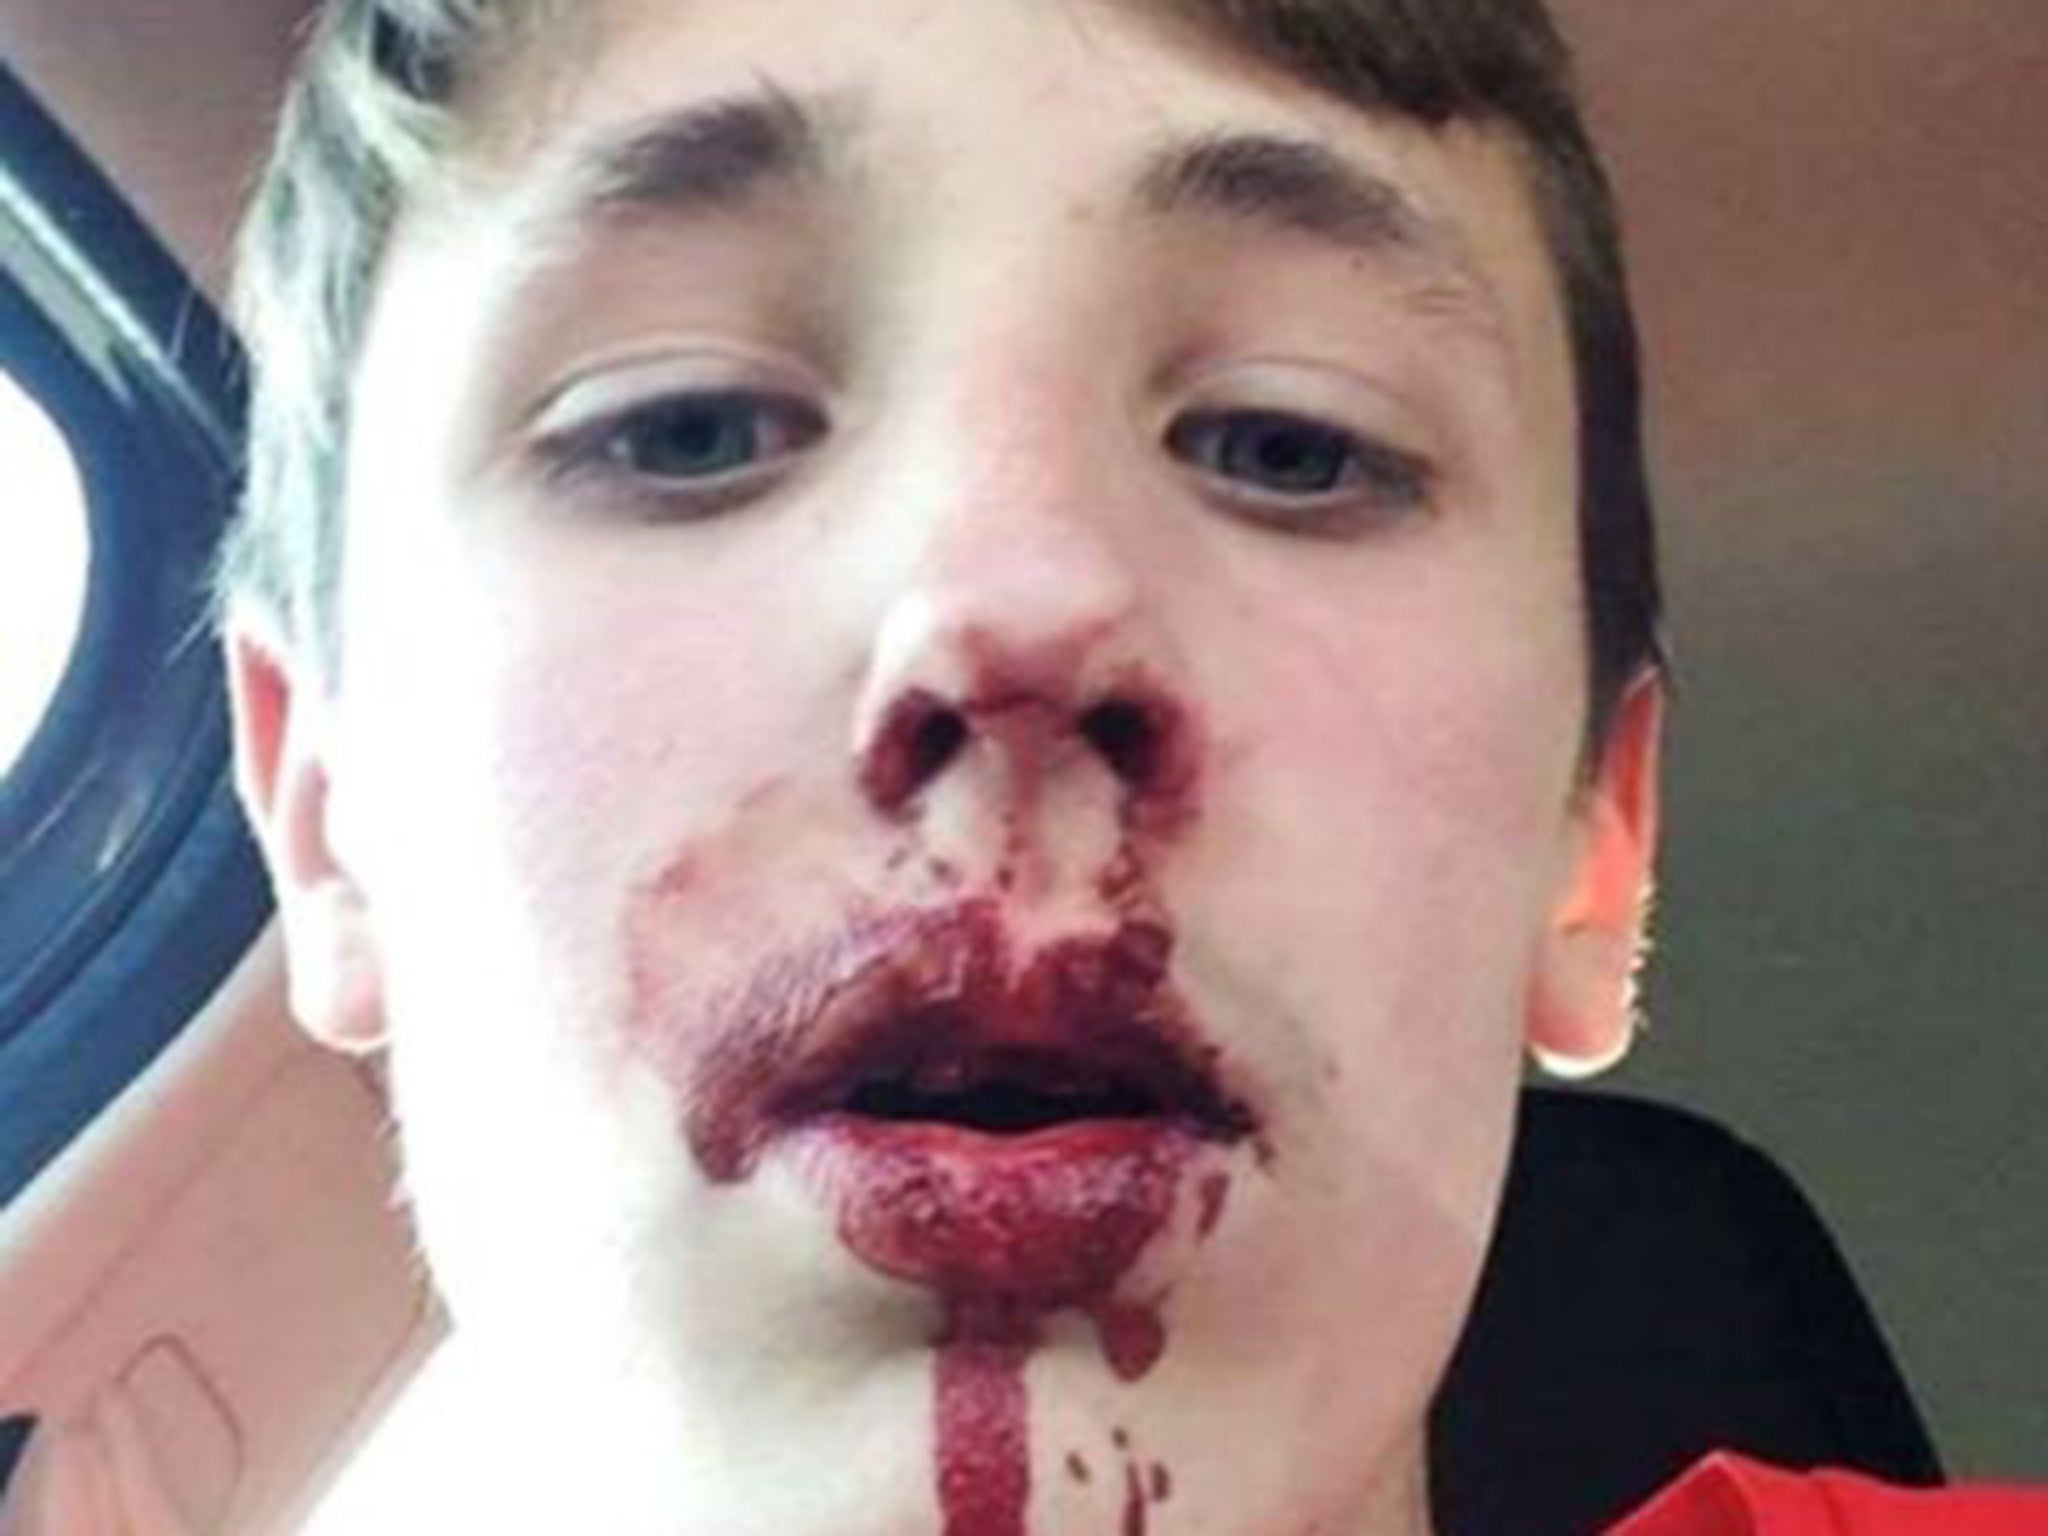 12-year-old Emerson Butler suffered a bloody nose and mouth after being punched by the Man City fan